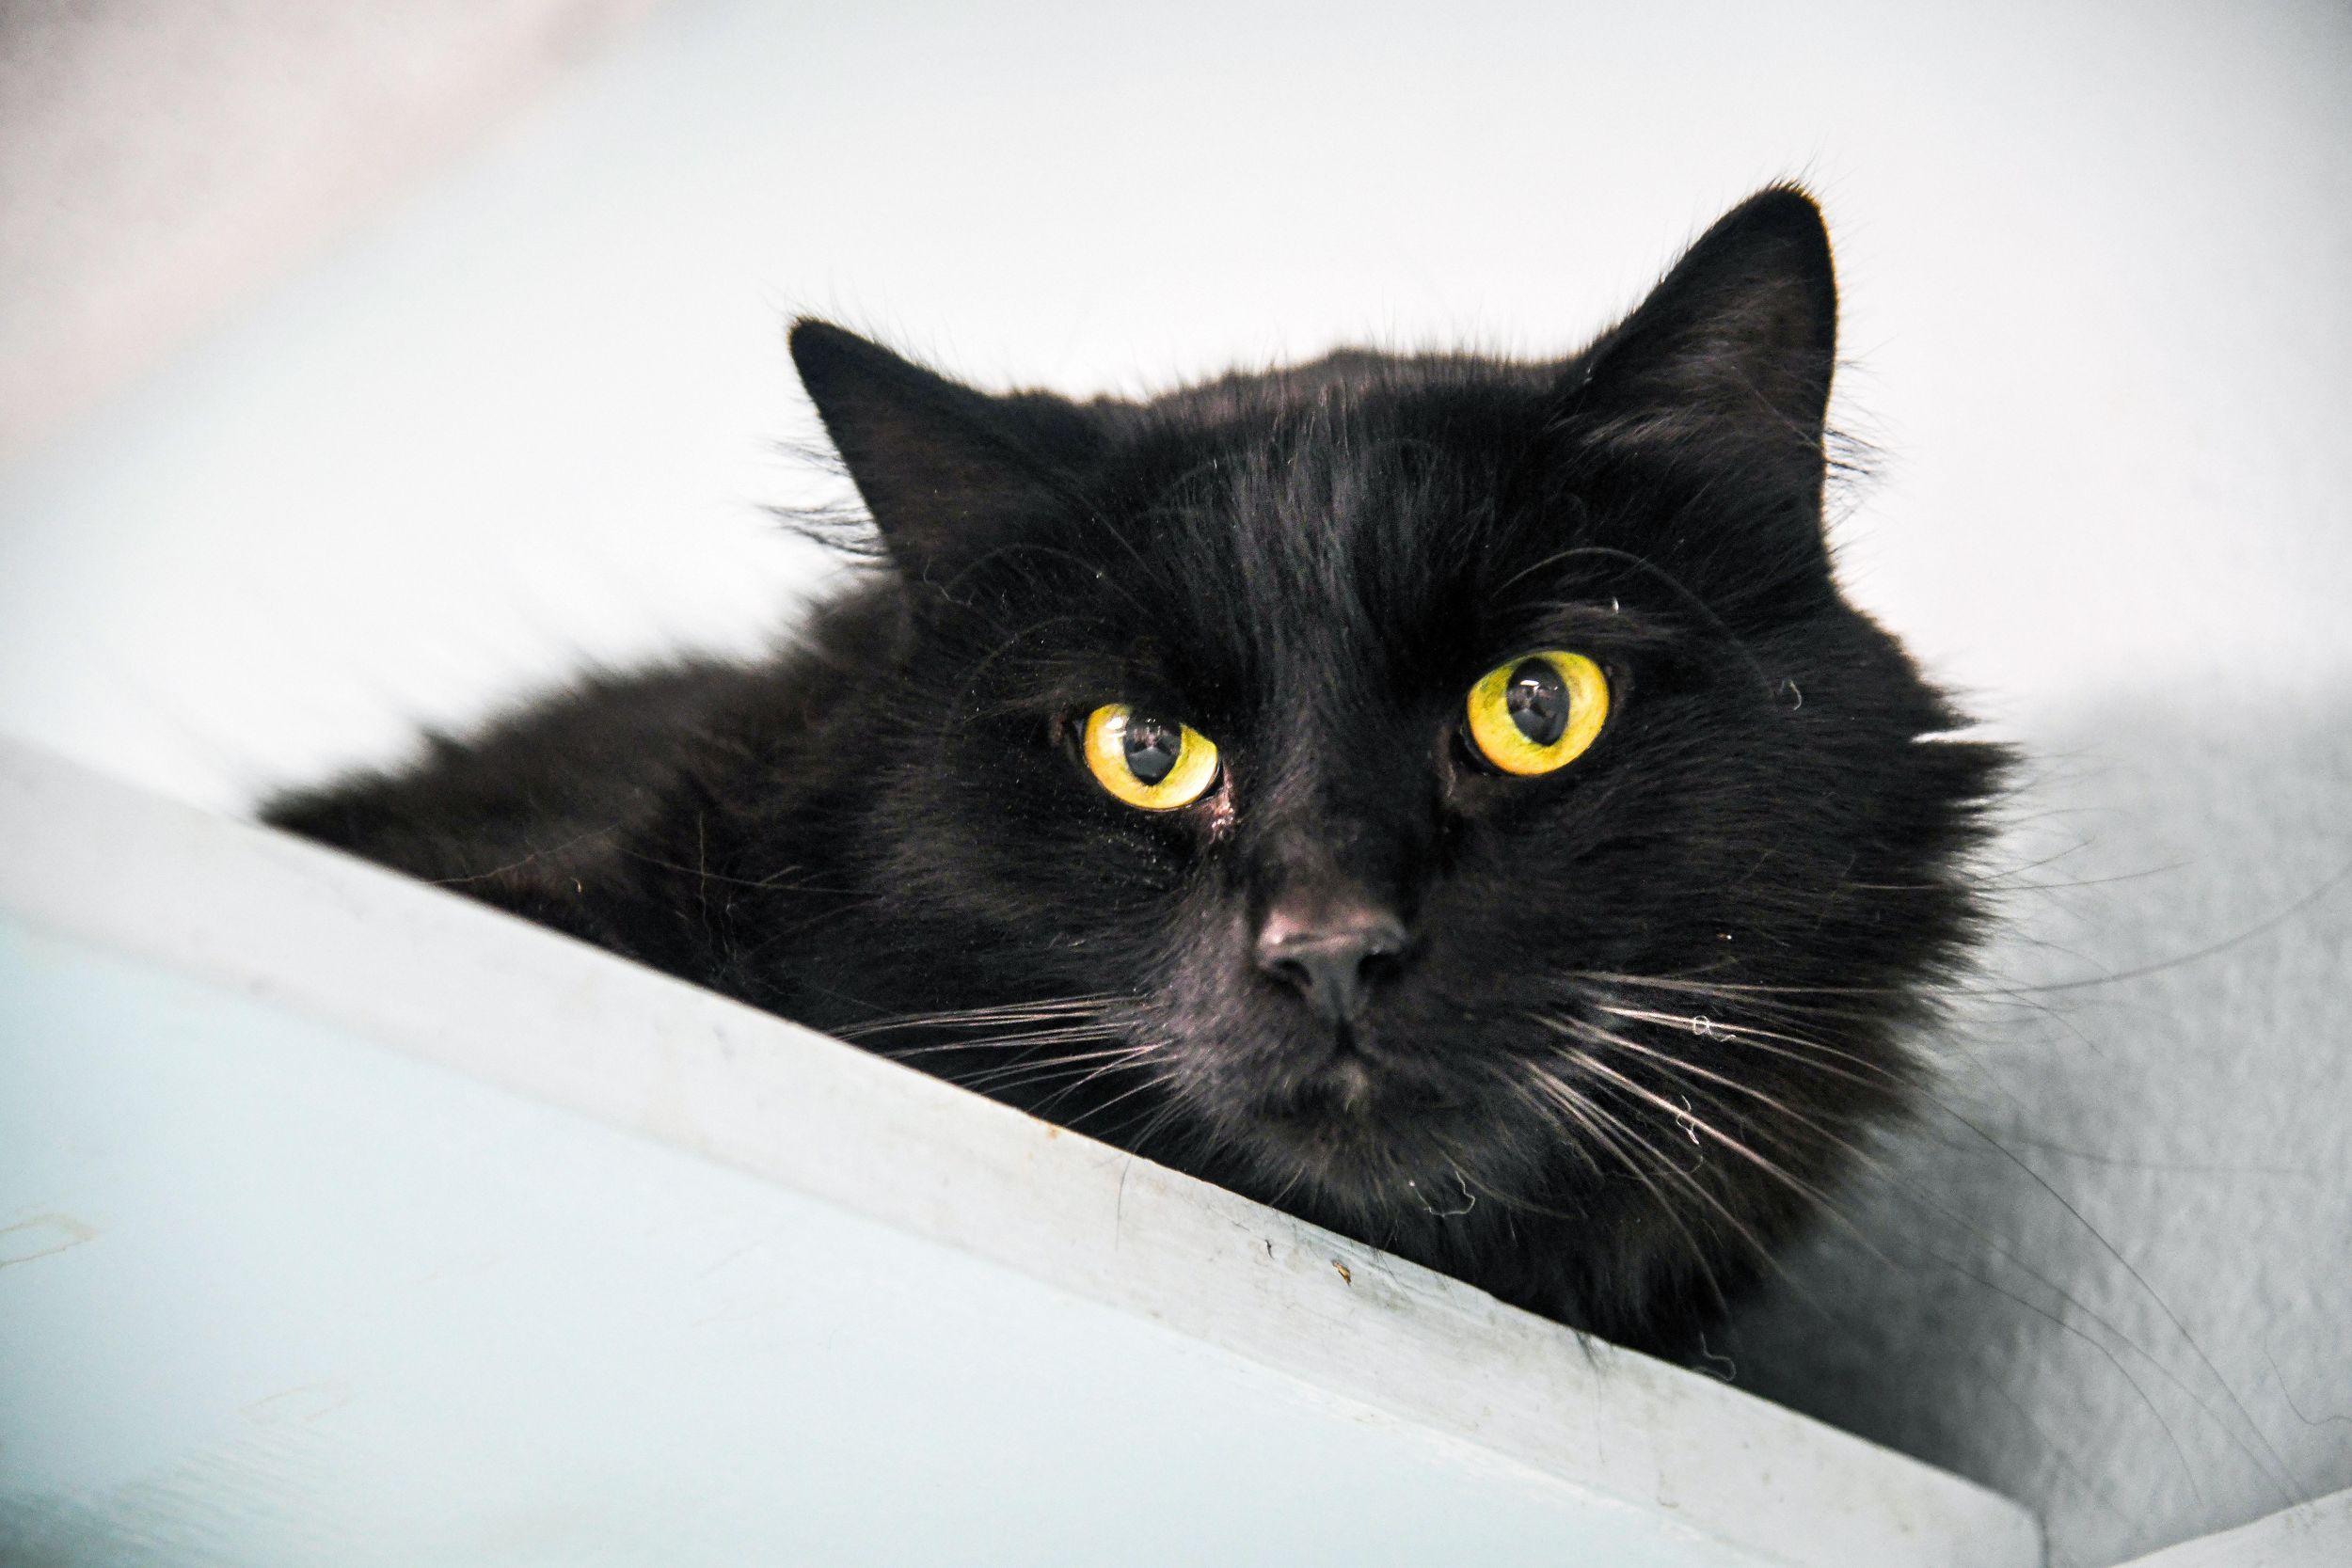 Local shelters say blackcat superstitions don’t affect adoptions The